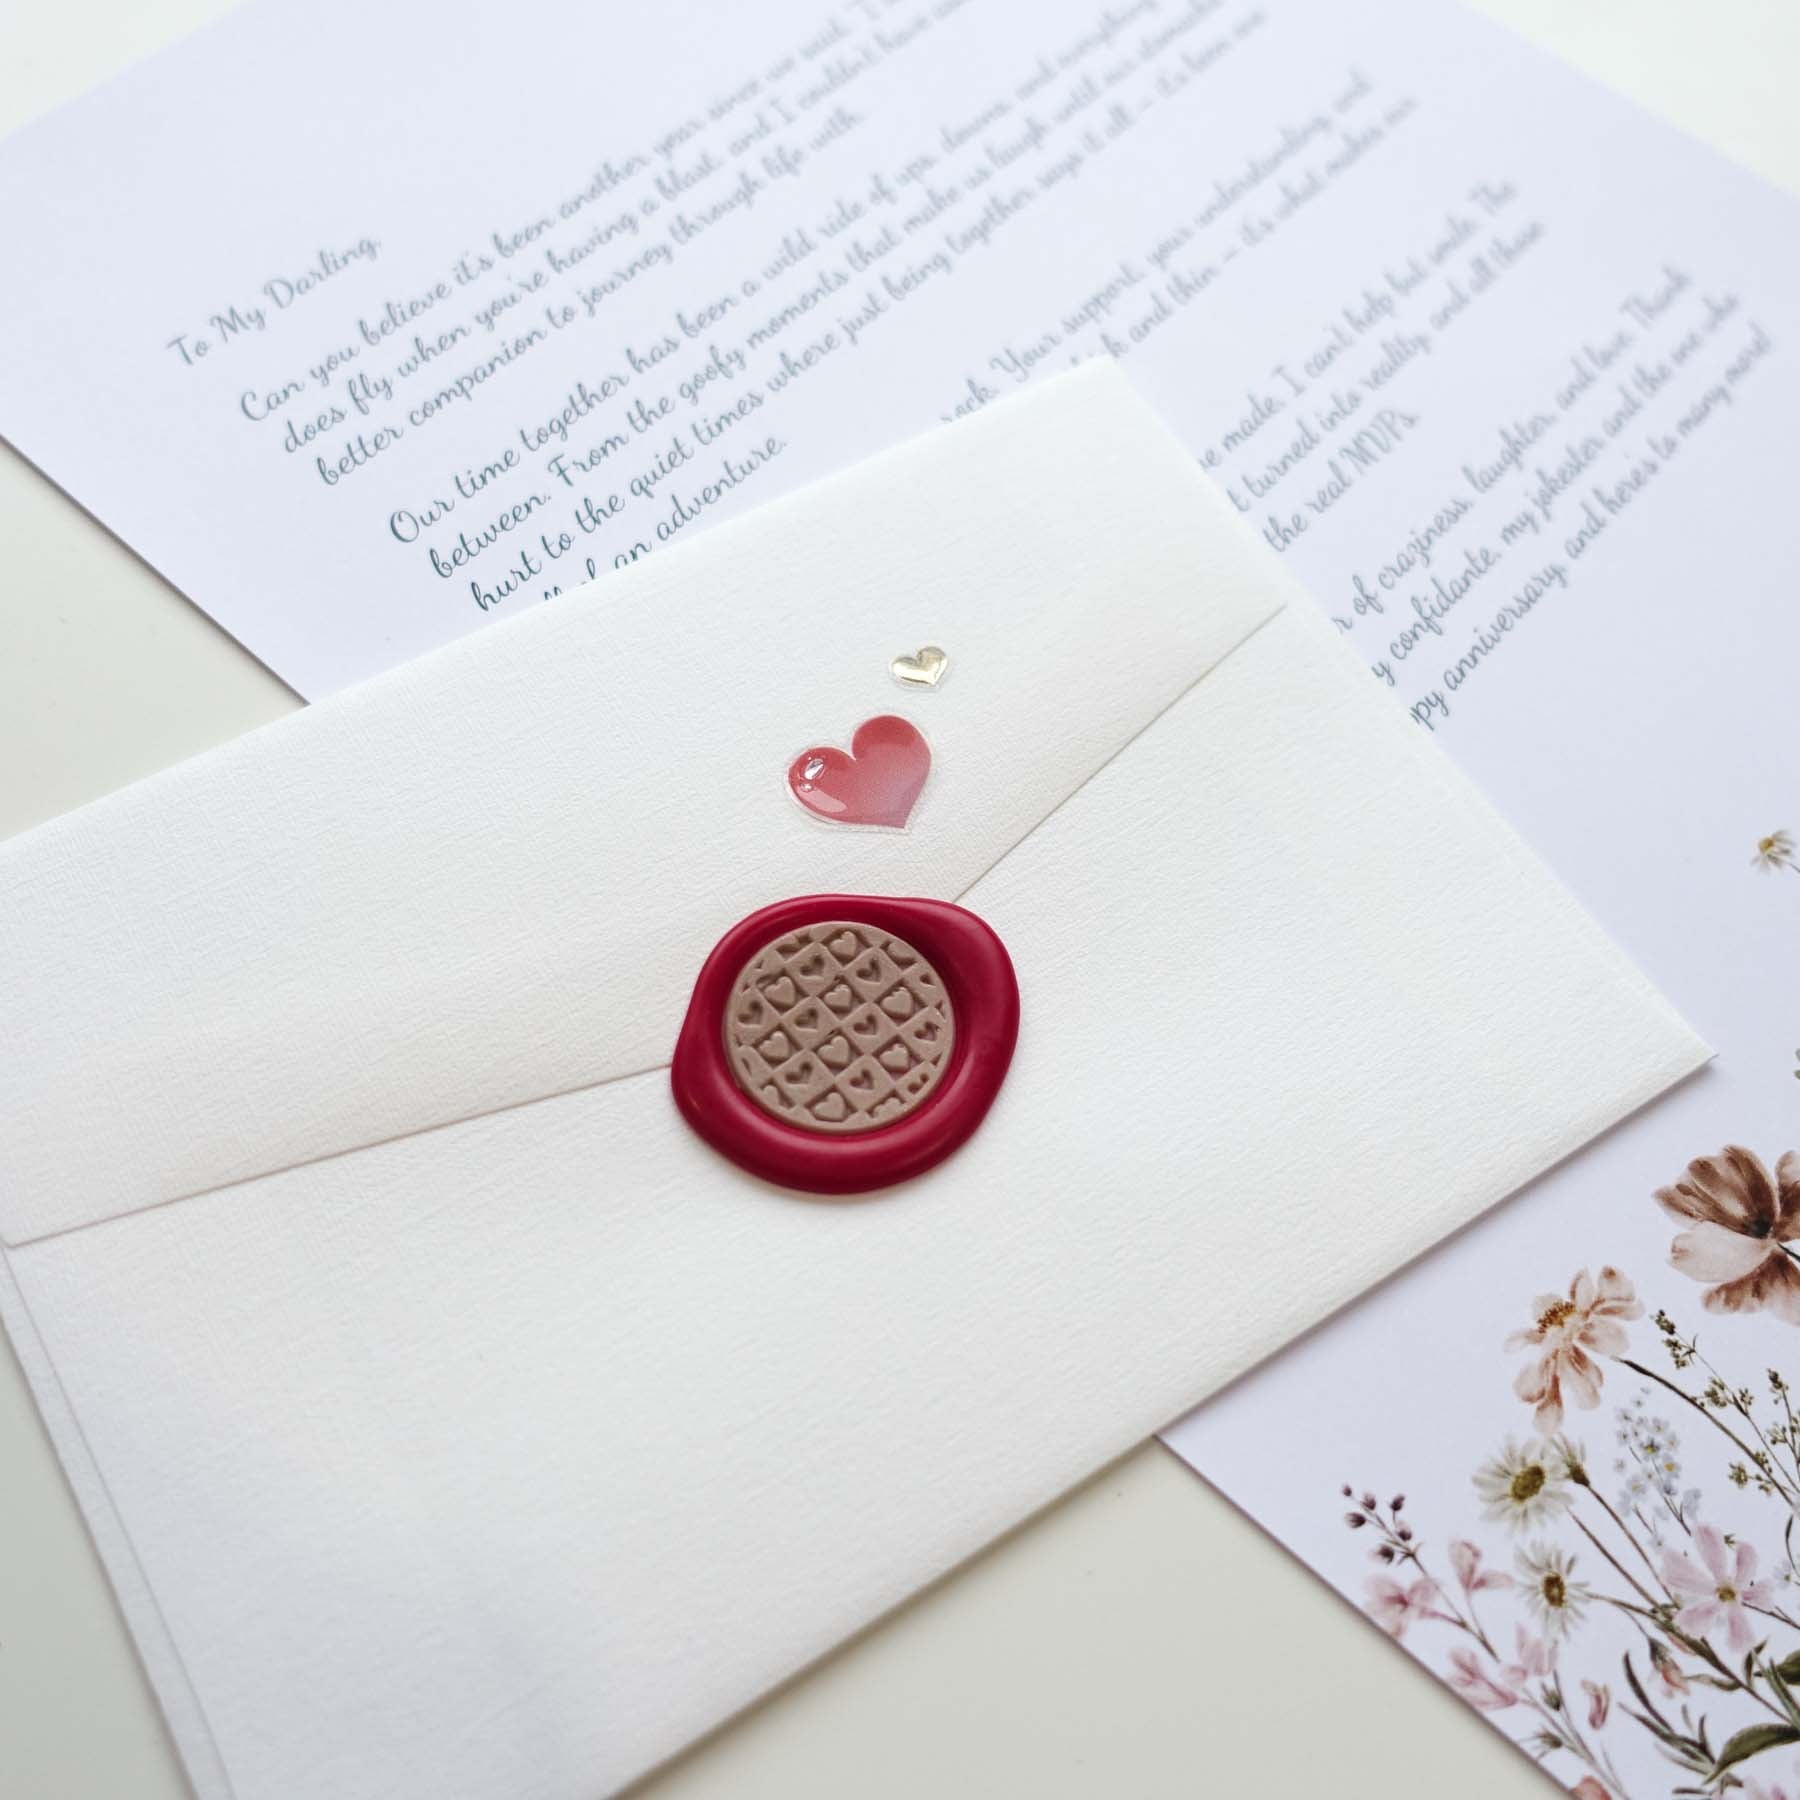 chequered hearts patchwork pattern wax seal letter envelope fiona ariva